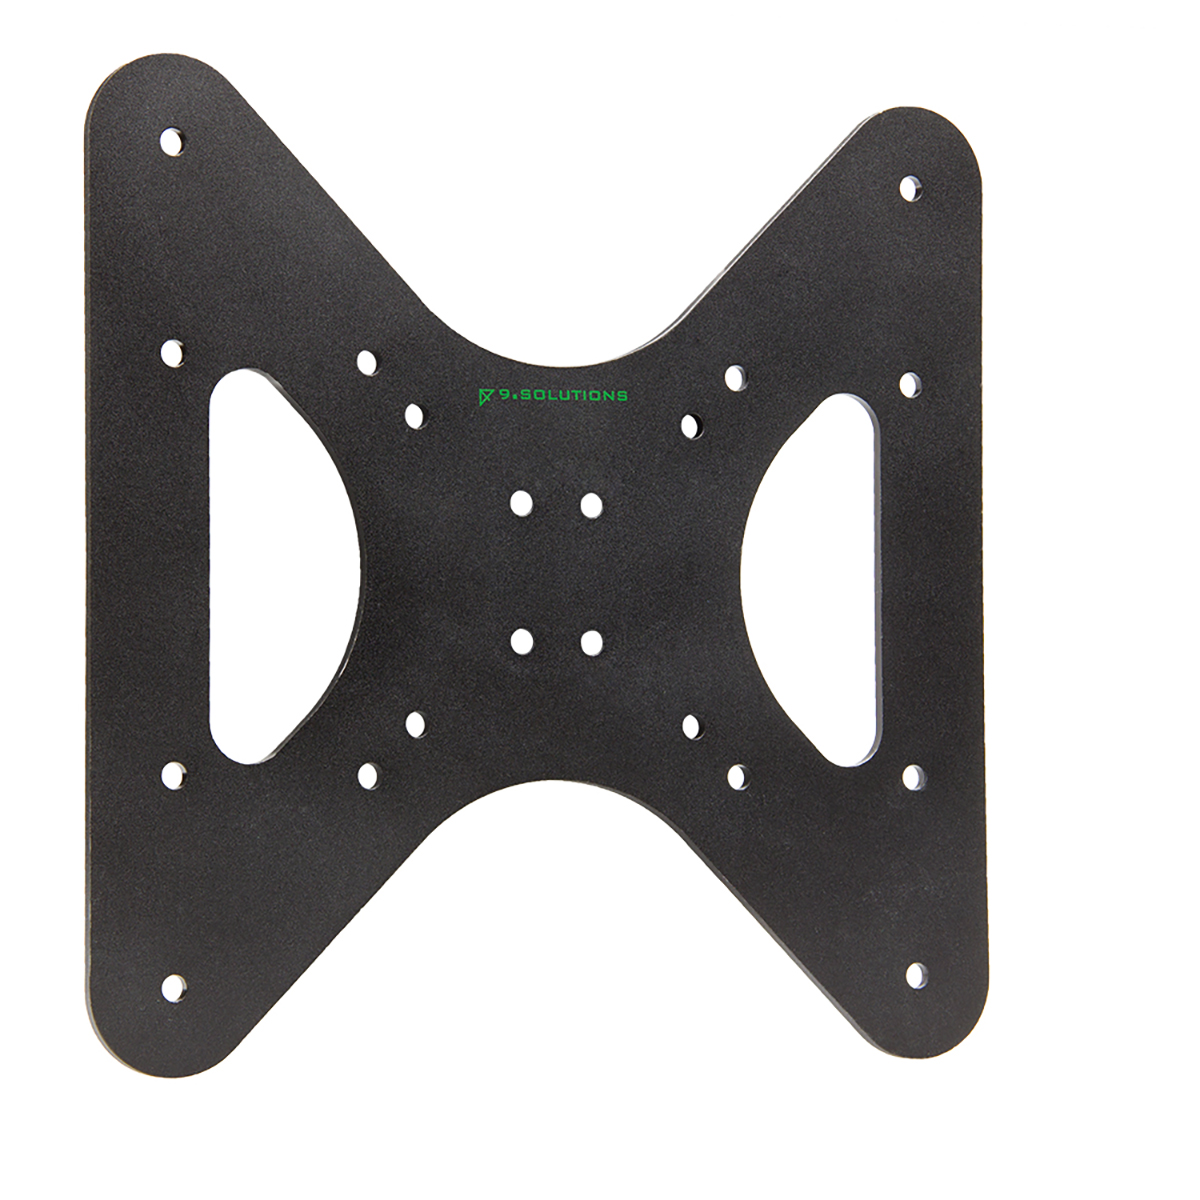 9.Solutions VESA Mount replacement/Upgrade plate